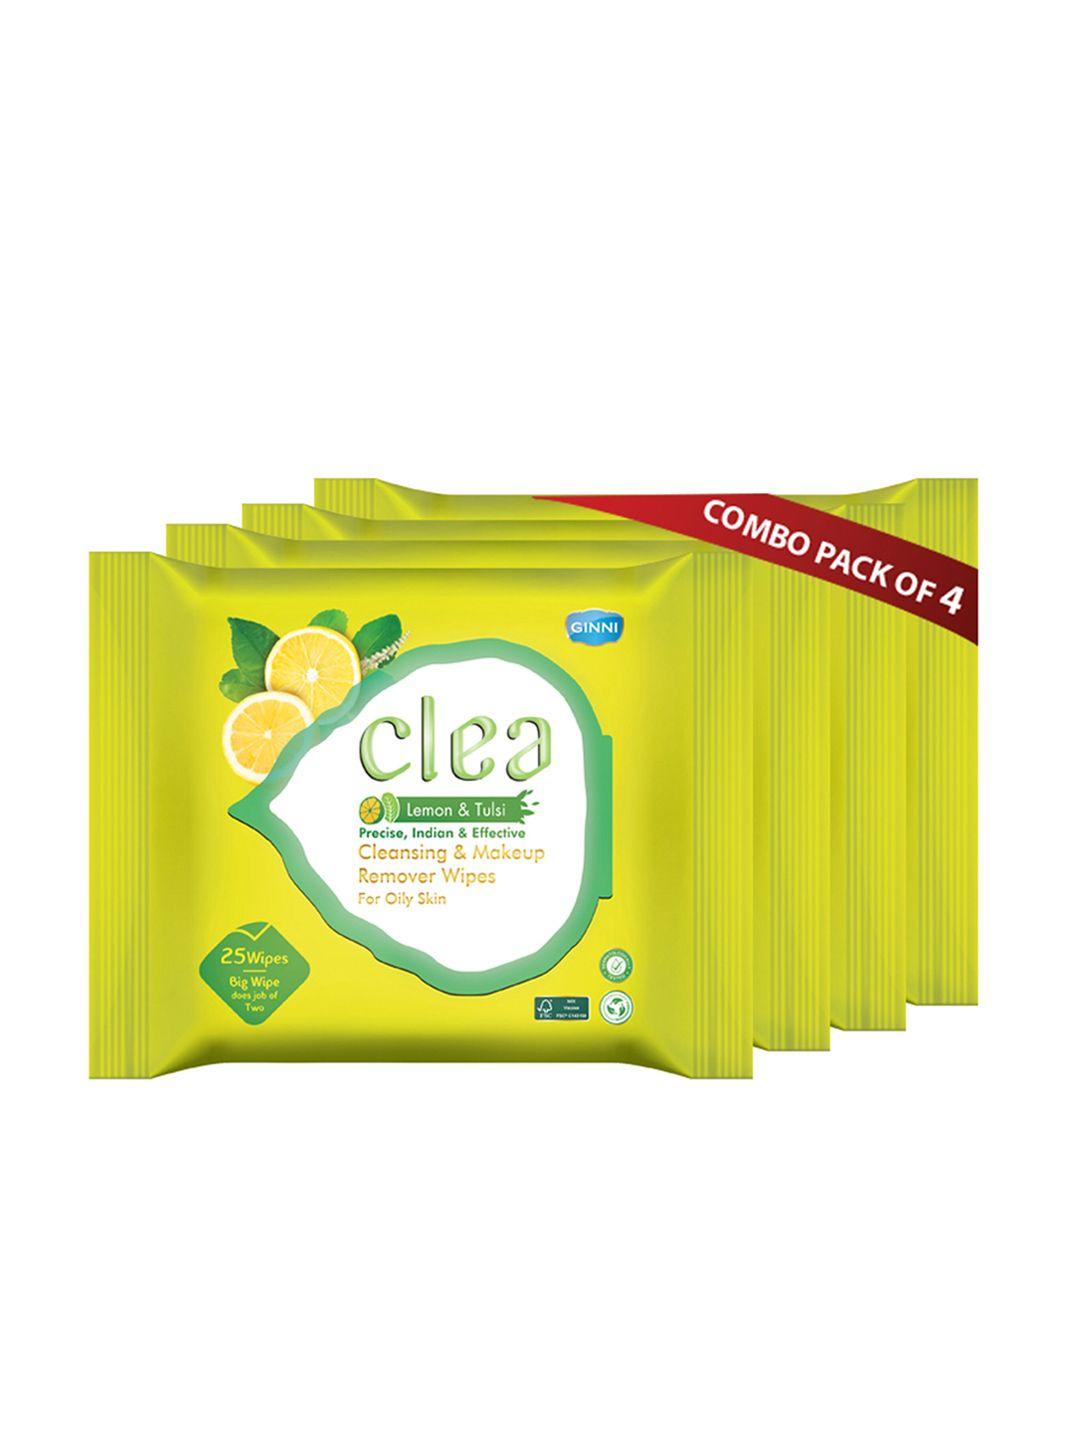 clea set of 4 lemon & tulsi cleansing & makeup remover wet wipes - 25 pulls each